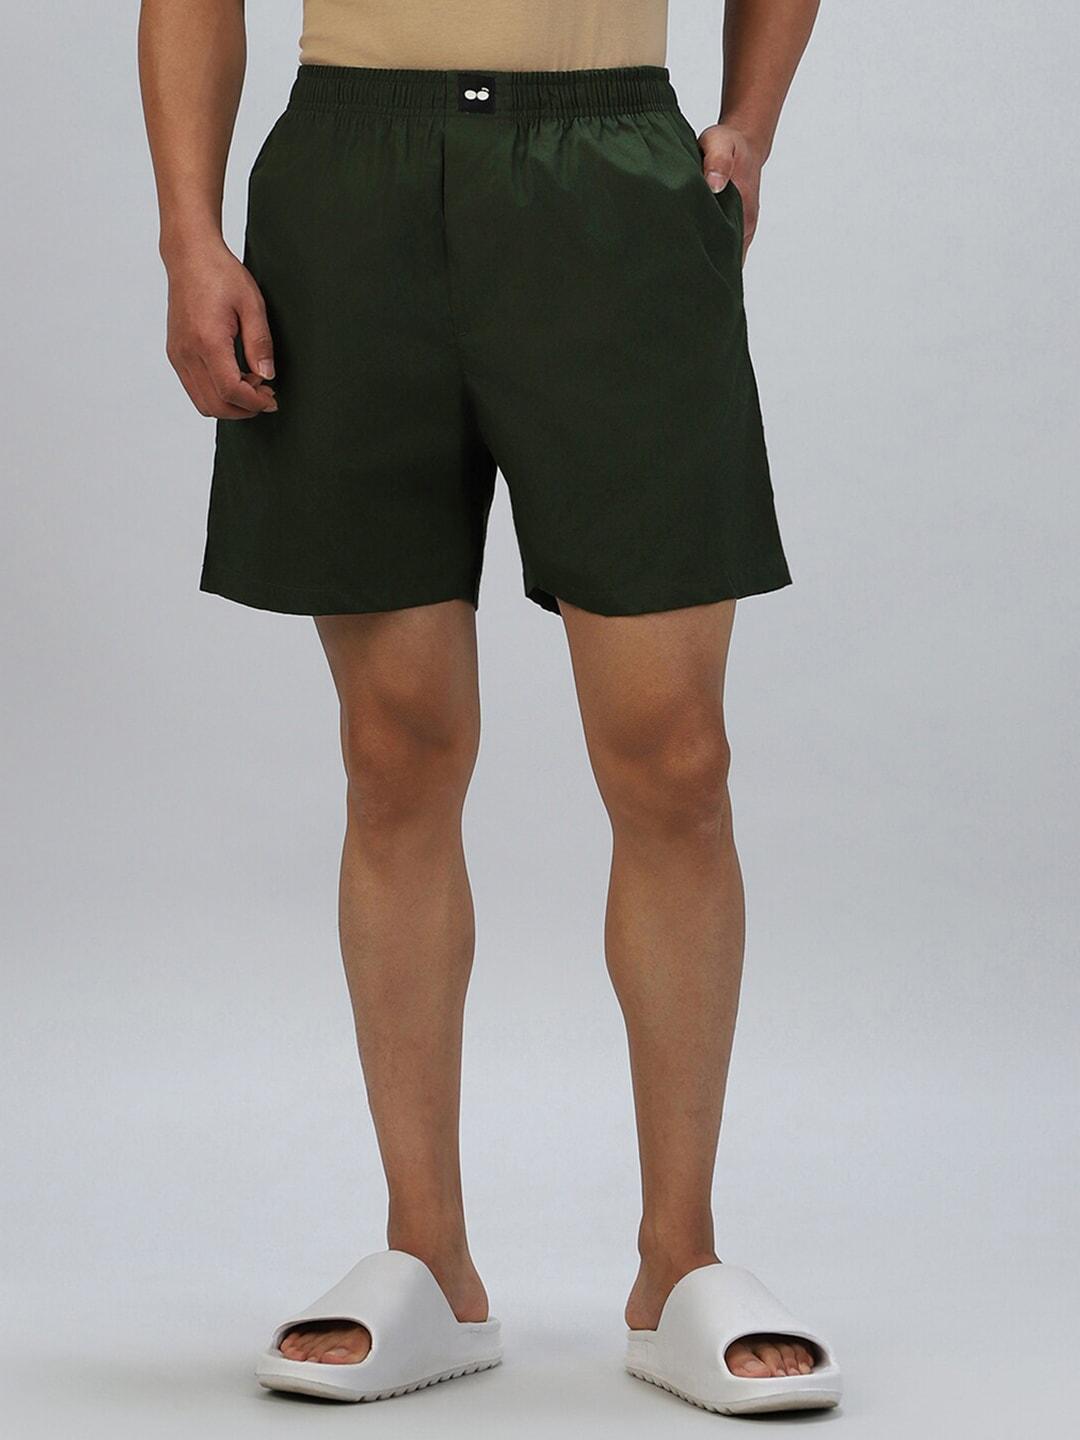 bewakoof olive green mid-rise cotton boxers 581630